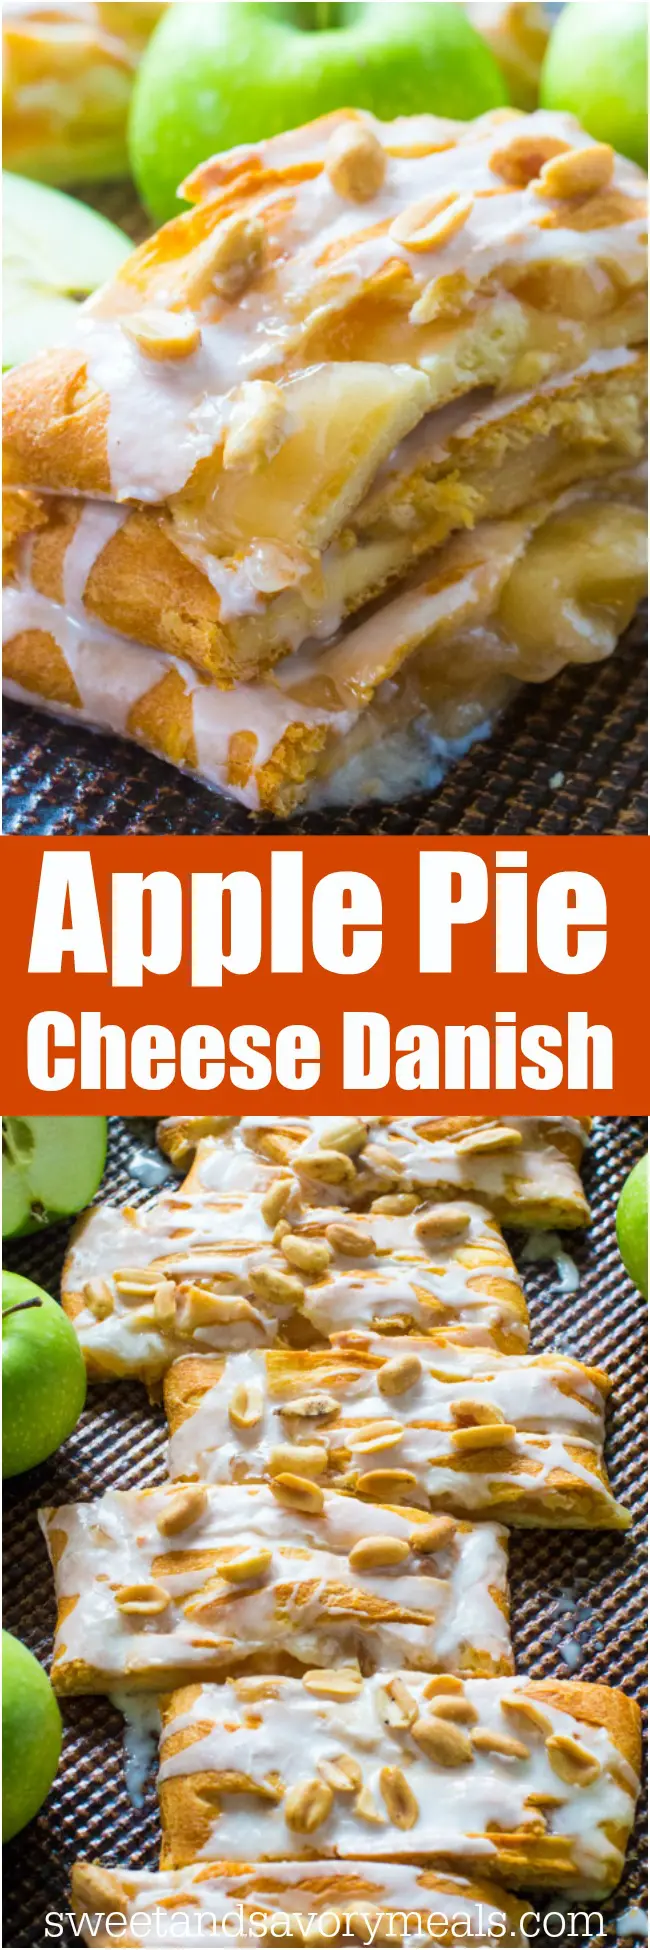 Apple Pie Danish incorporates all the great fall flavors in an easy, flaky and sweet, seasonal danish, made with cheesecake and apple pie filling.